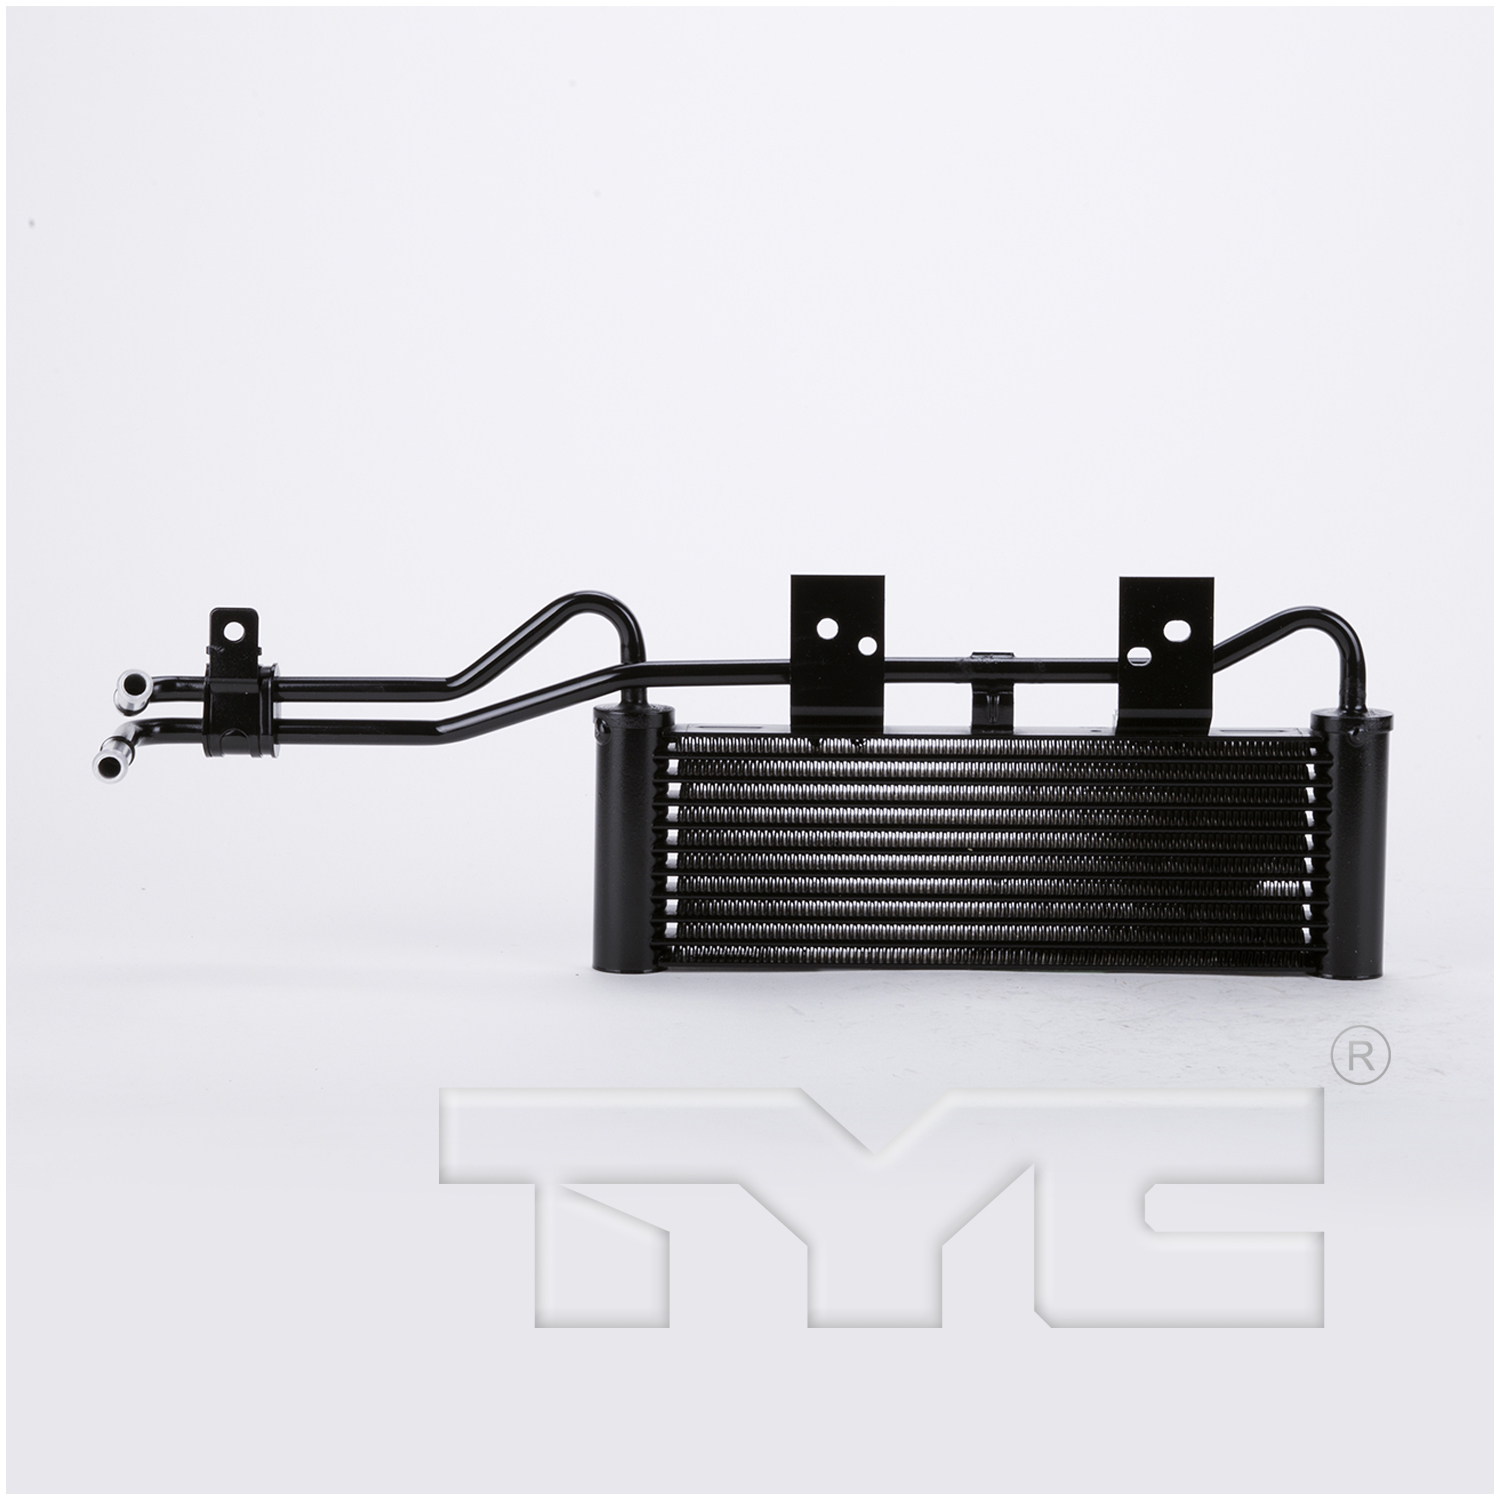 Aftermarket RADIATORS for HYUNDAI - GENESIS COUPE, GENESIS COUPE,10-12,Transmission cooler assembly